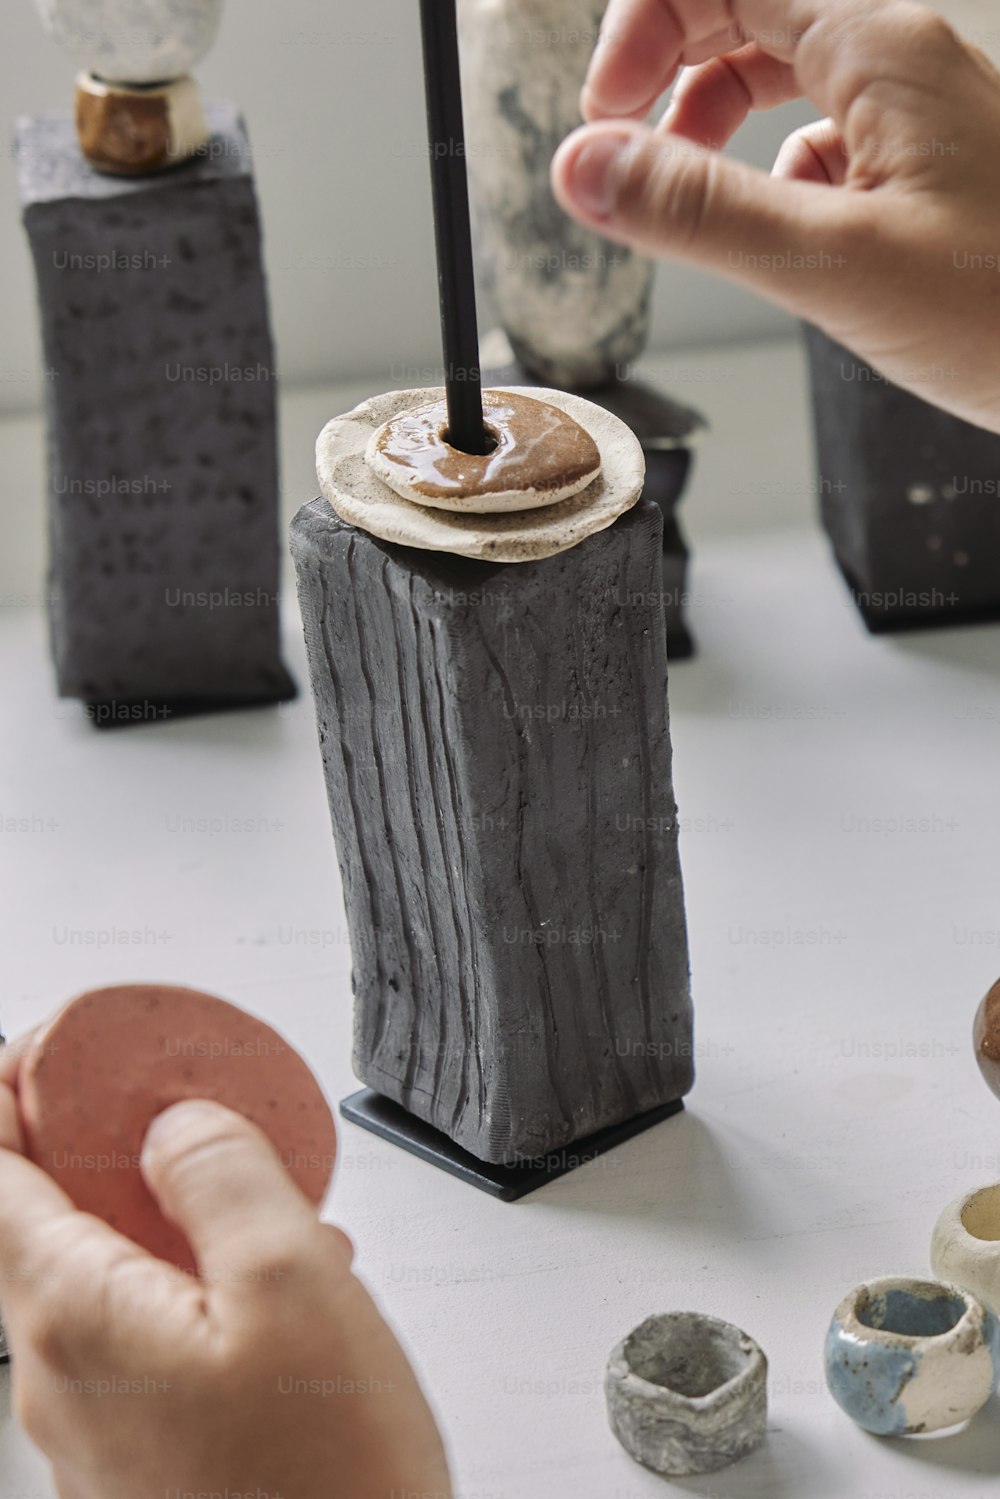 a person is decorating a vase with clay